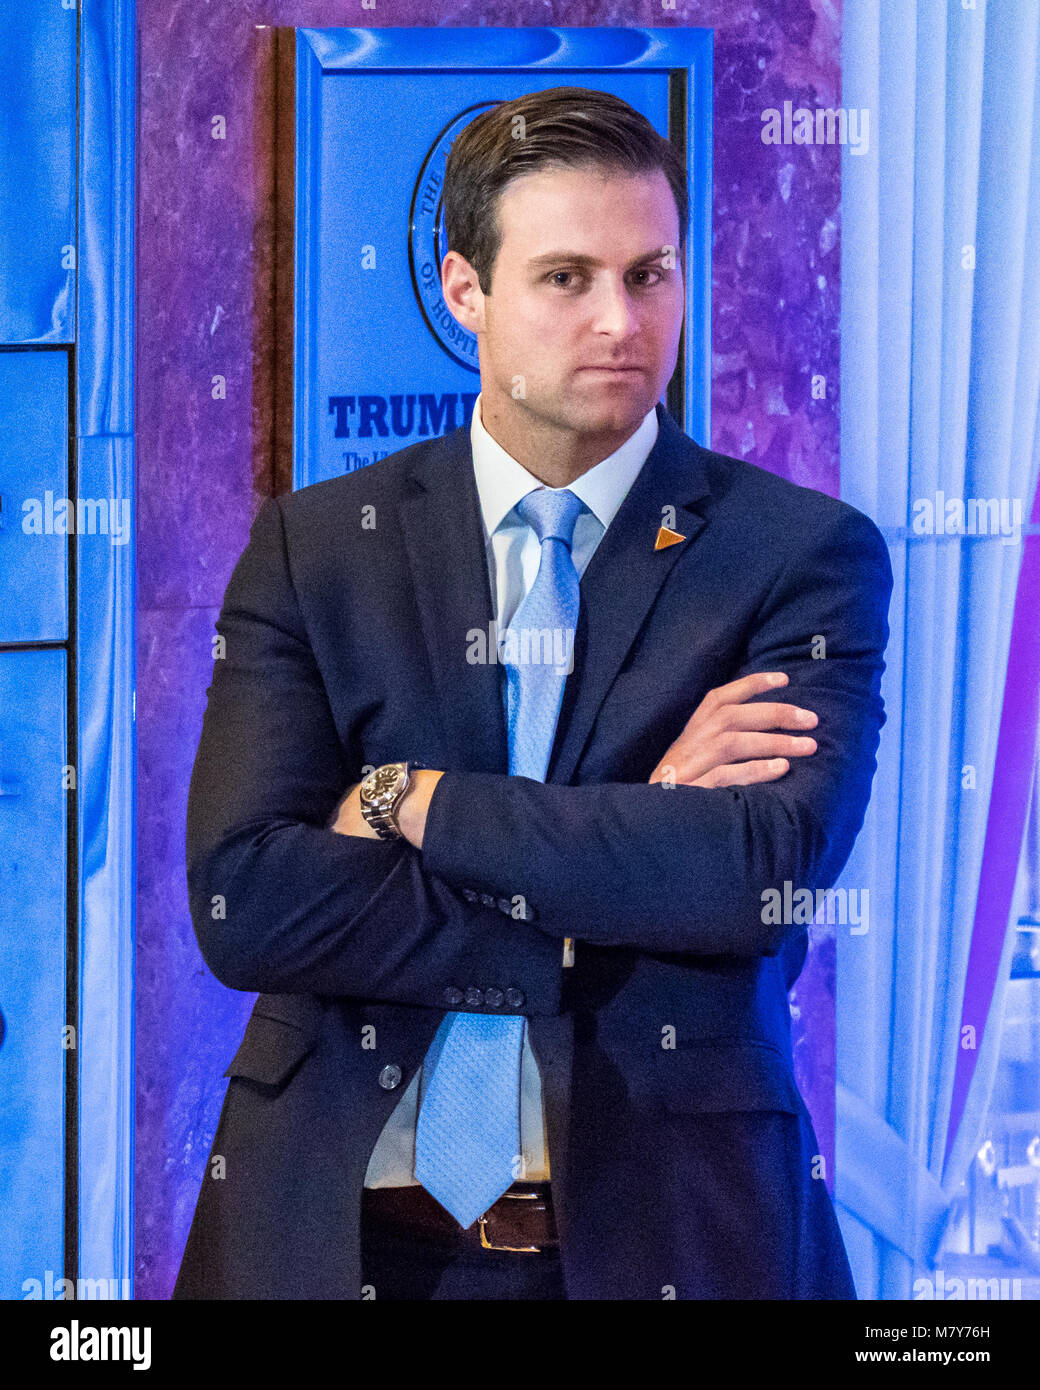 New York, USA, 13 Mar 2018. US president Donald Trump's personal assistant John McEntee is seen in this file photo taken at New York's Trump tower on January 11, 2017.  McEntee was forced out of his position and escorted from the White House on Monday after his security clearance was revoked.  Photo by Enrique Shore Stock Photo